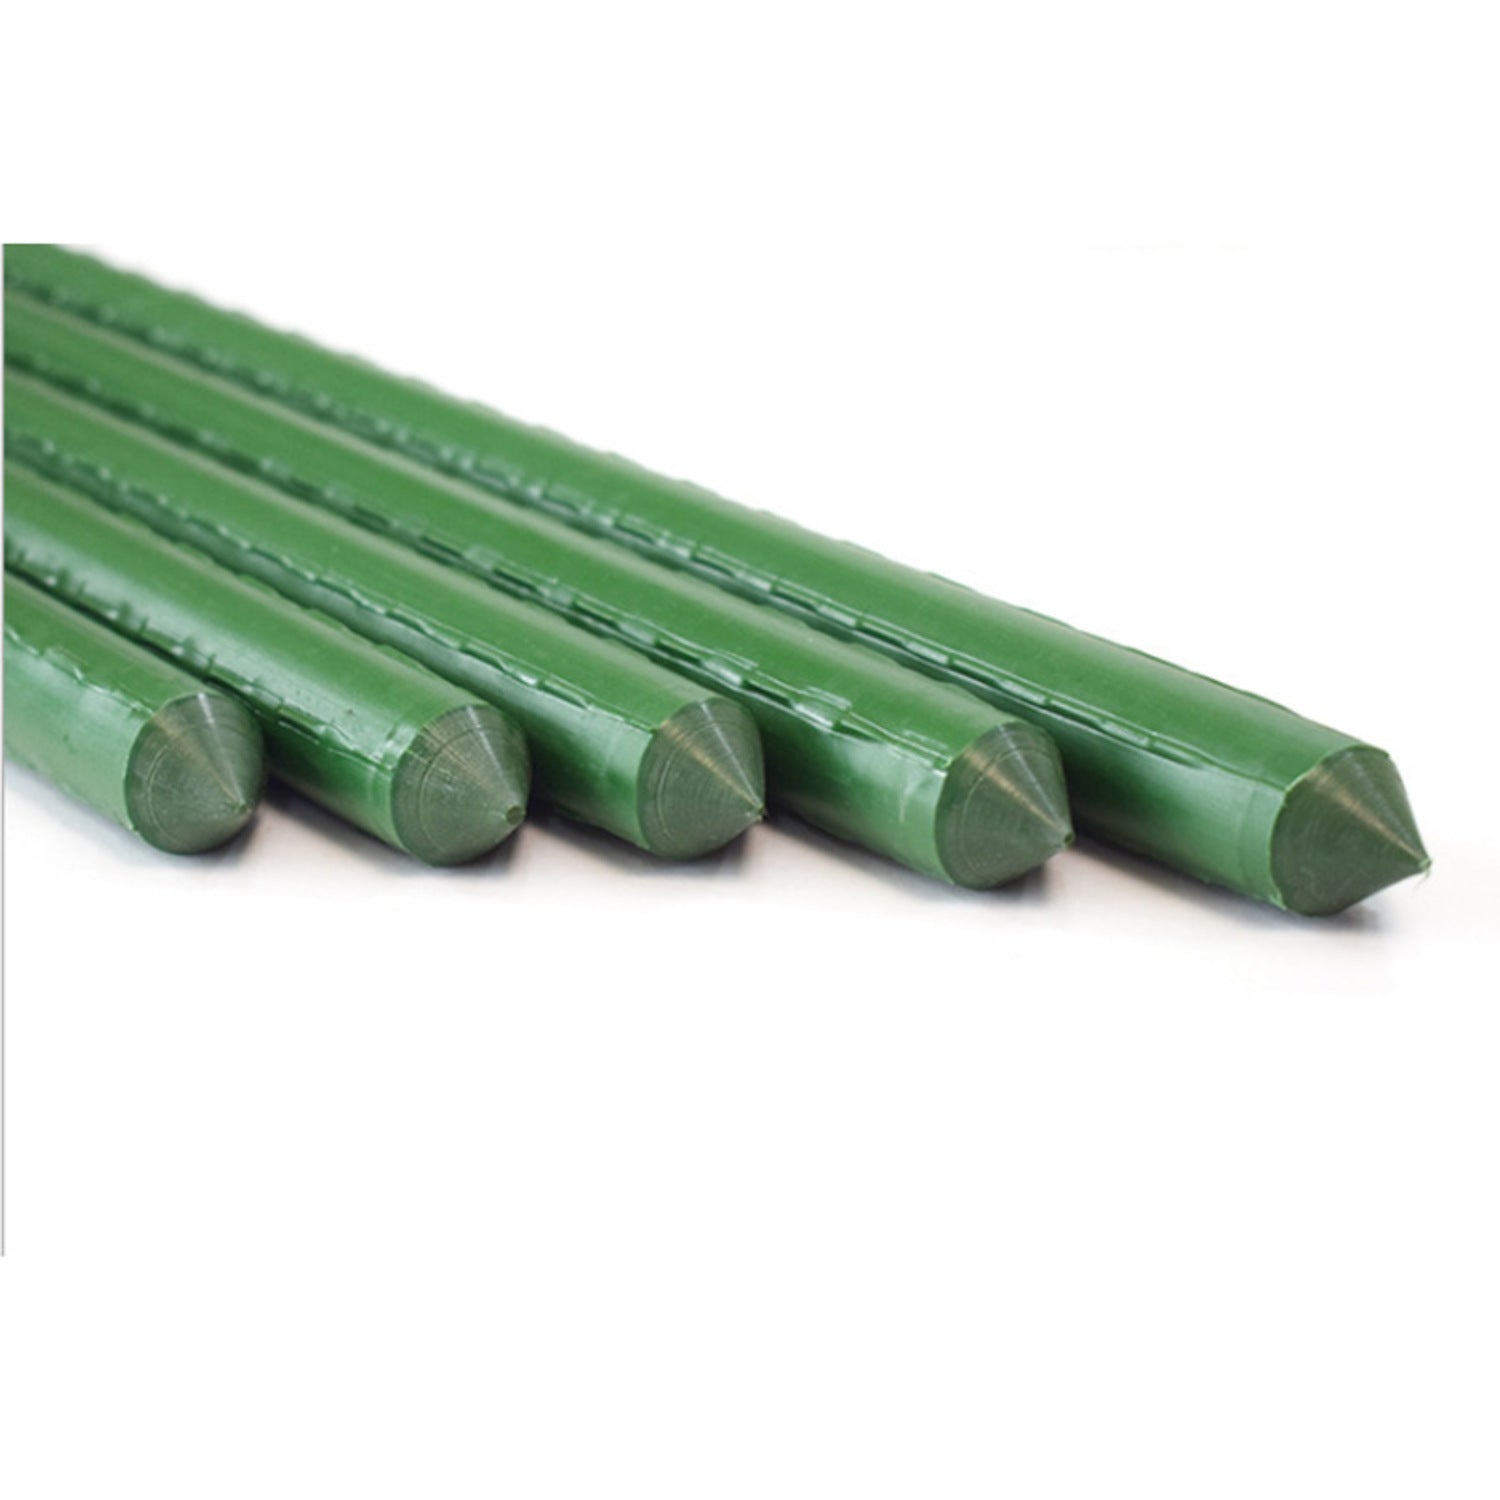 NOVEDEN 24pcs 120CM Metal Plant Support Stakes (Green)